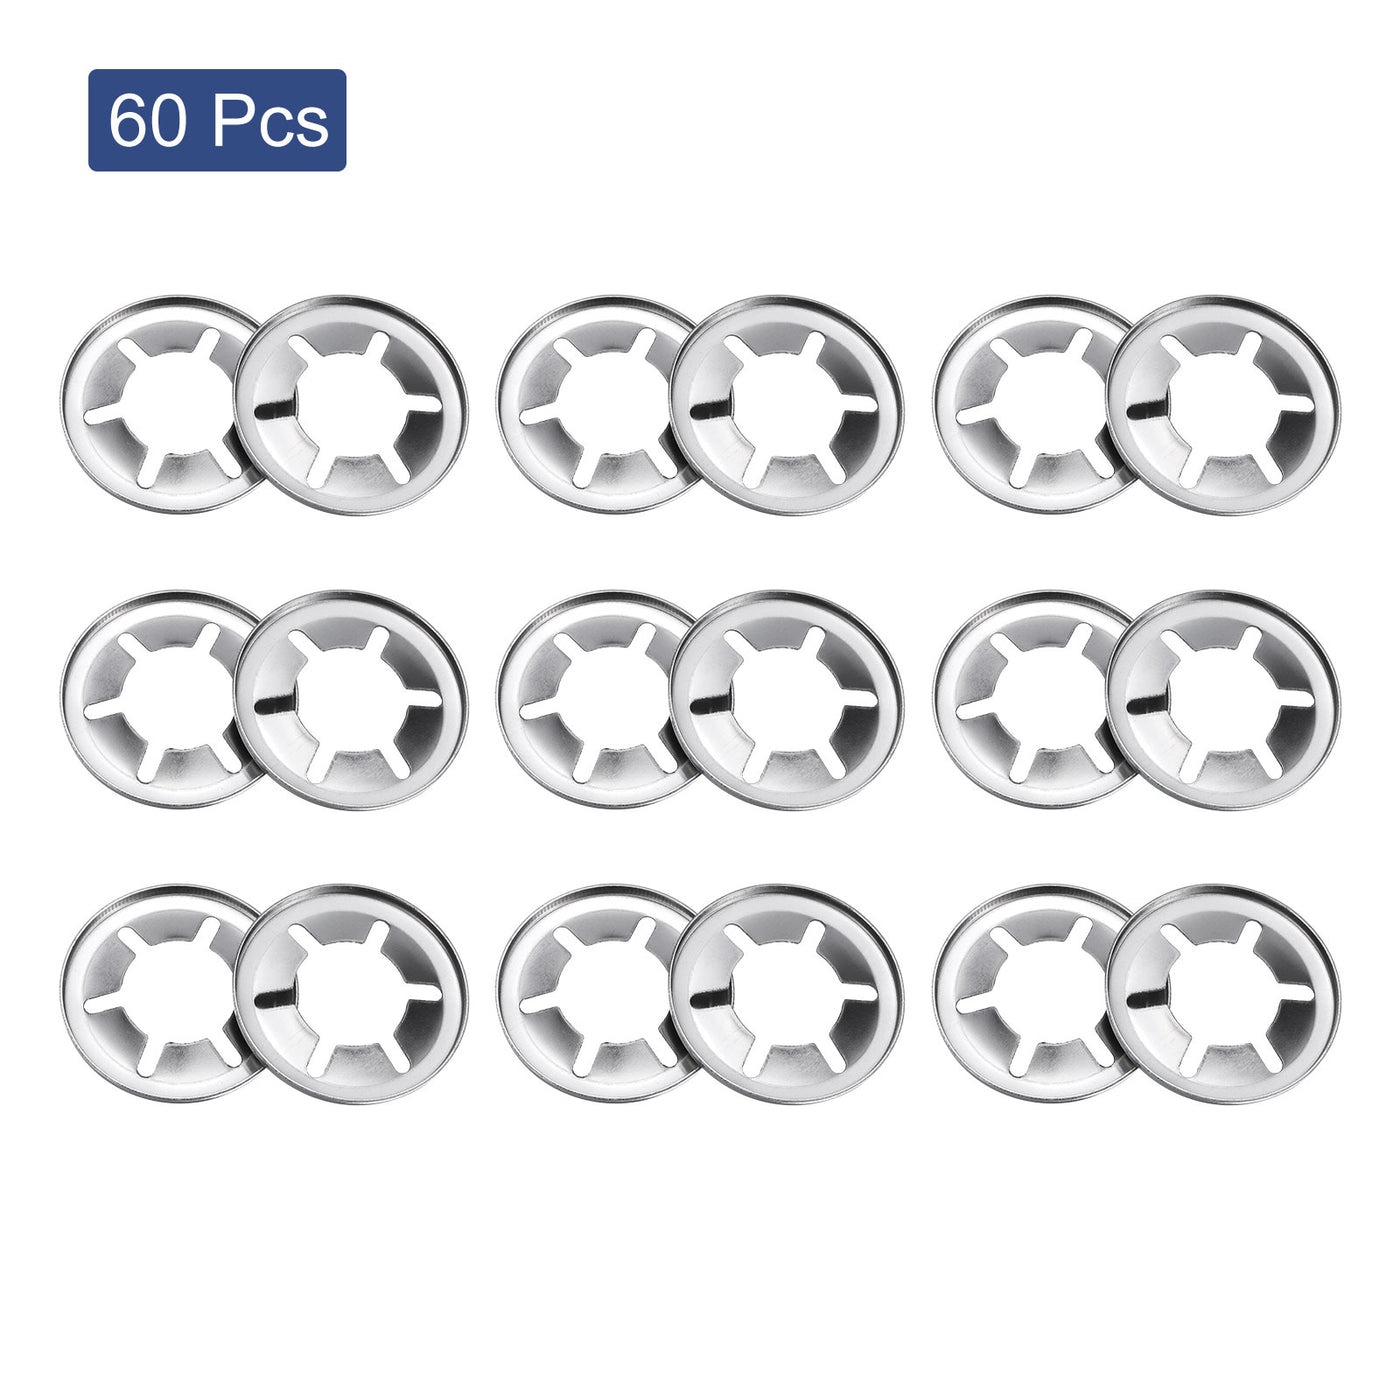 uxcell Uxcell 60pcs Internal Tooth Star Lock Washers M14 Quick Locking Washers Stainless Steel